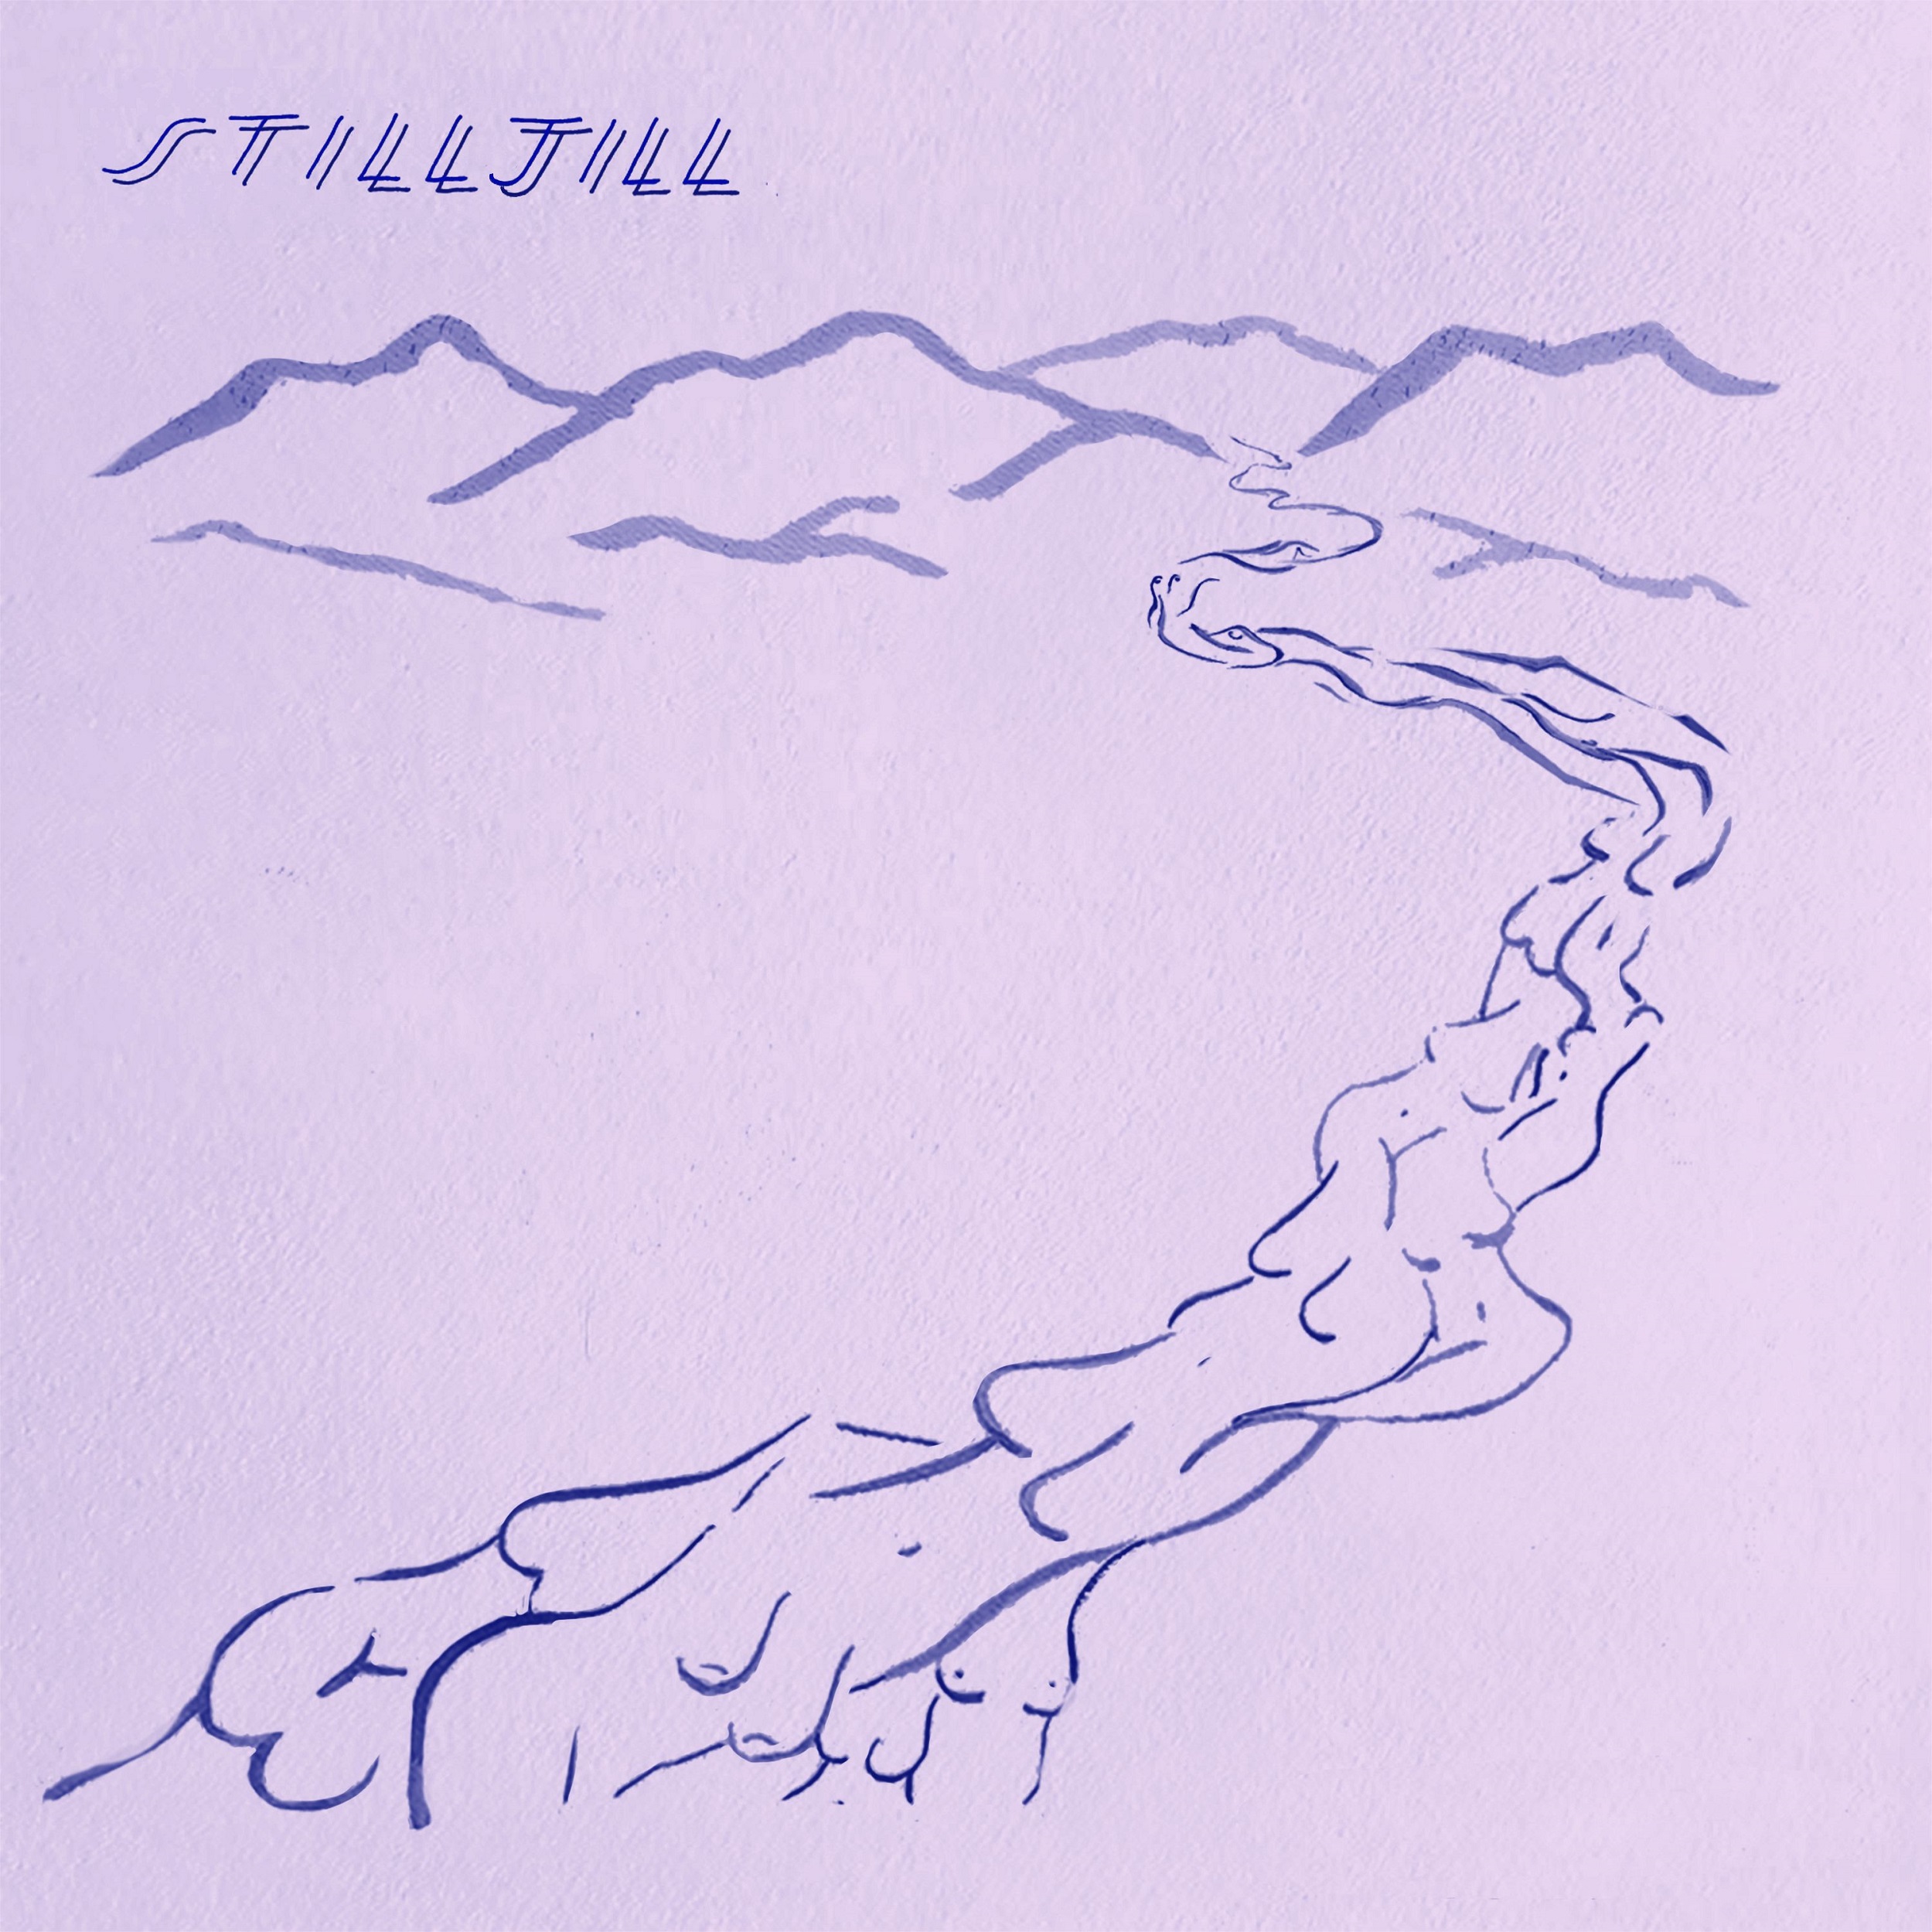 artwork for Waterslides, an EP by the band Stilljill